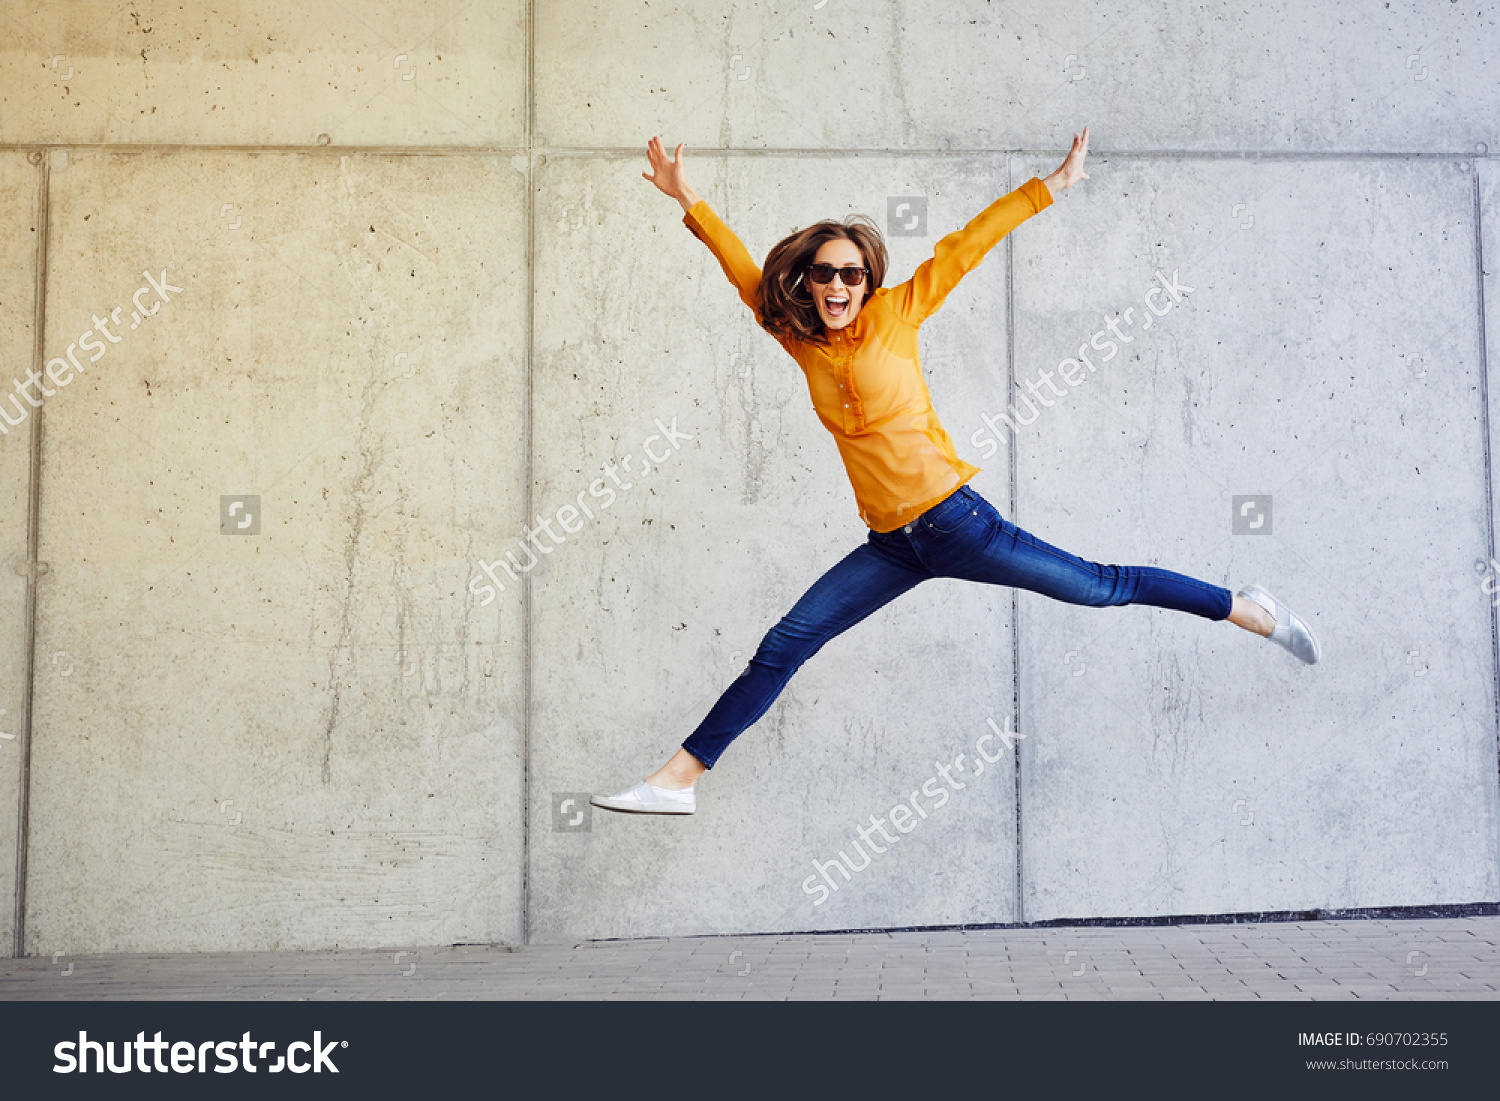 Joyful young lady jumping and raising arms in front of wall outside #690702355